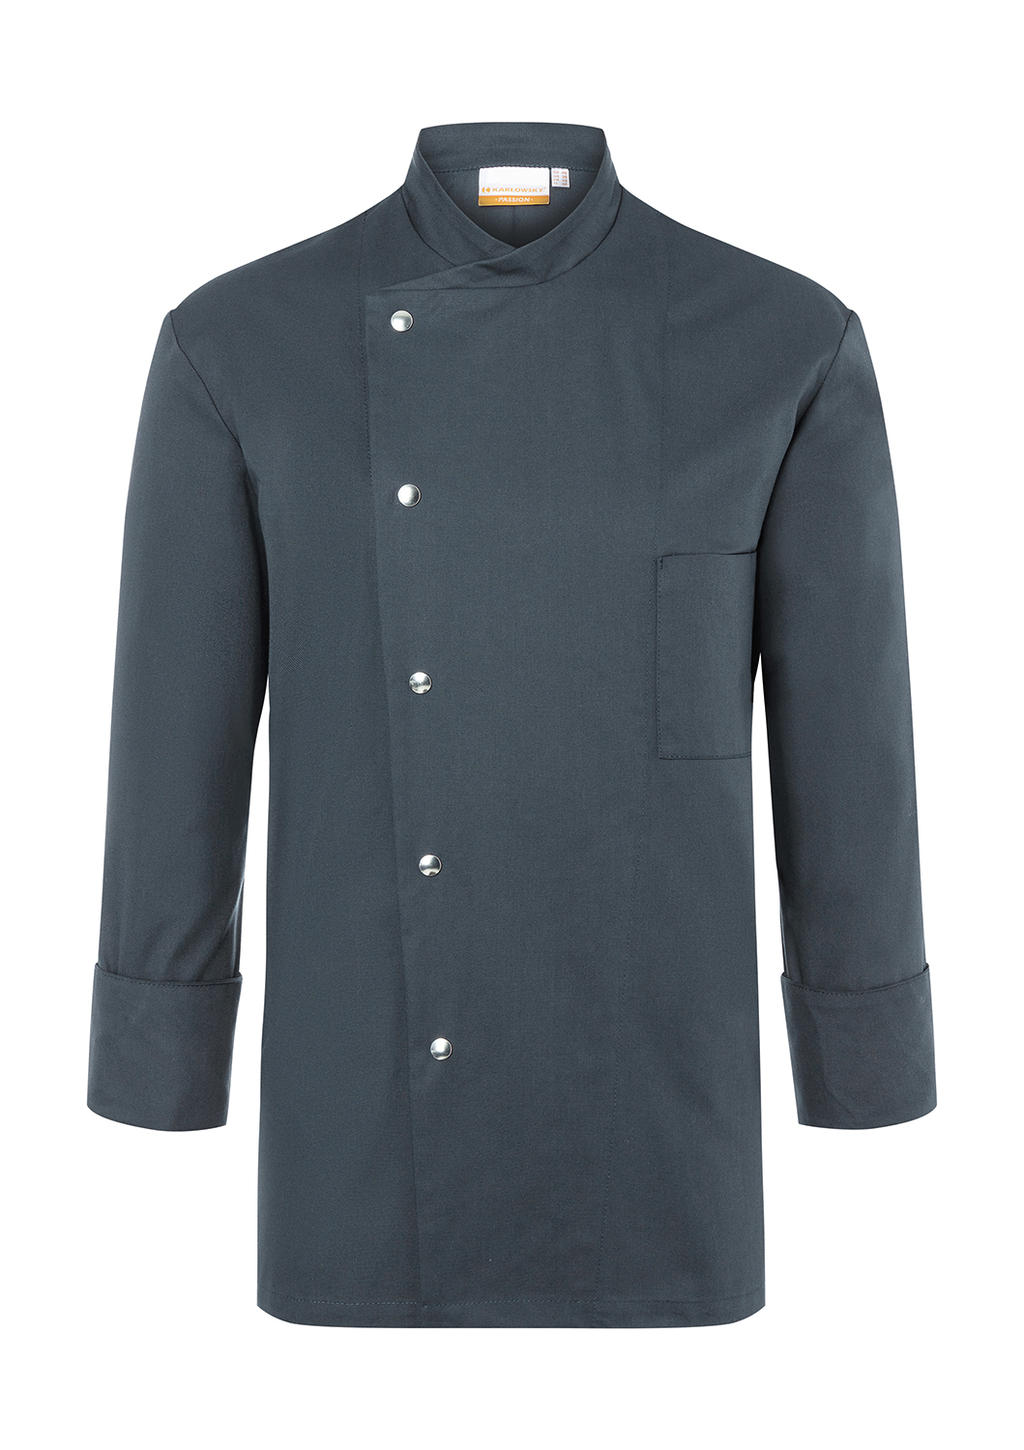  Chef Jacket Lars Long Sleeve in Farbe Anthracite